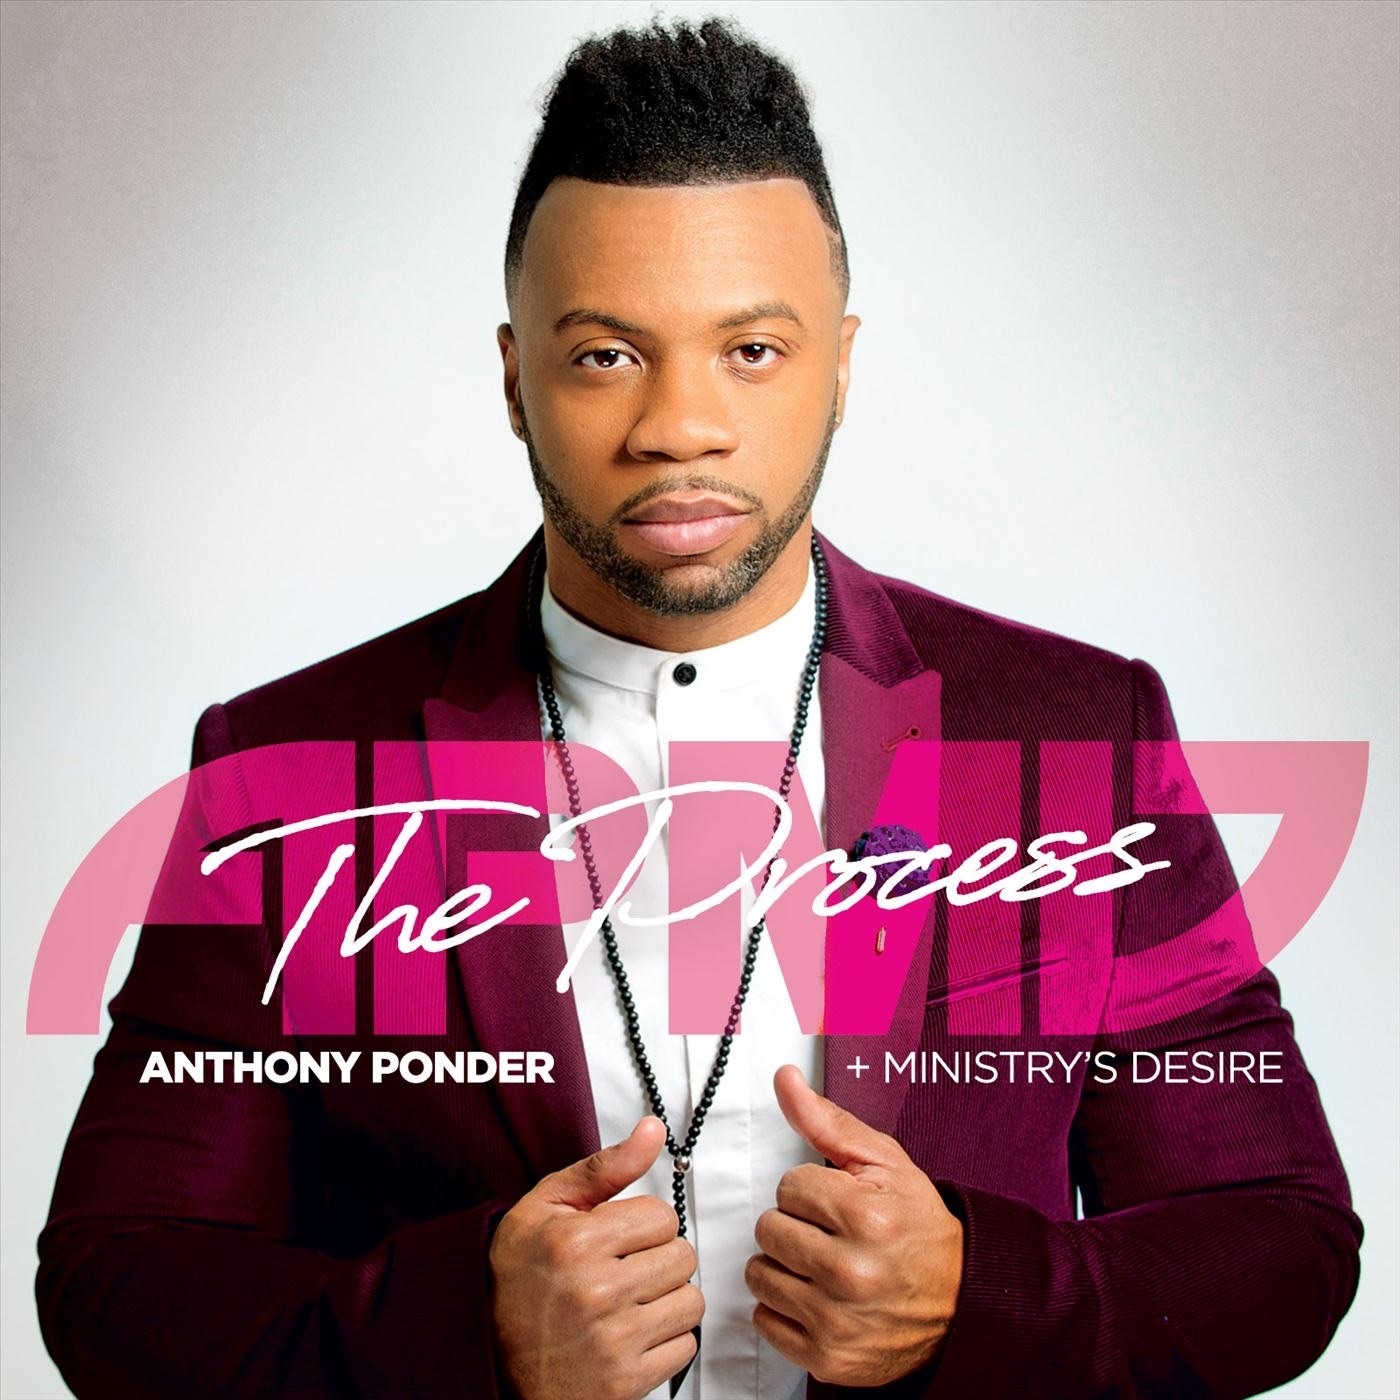 Art for Favor (feat. Natalie Wilson) by A.P.M.D. - Anthony Ponder & Ministry's Desire